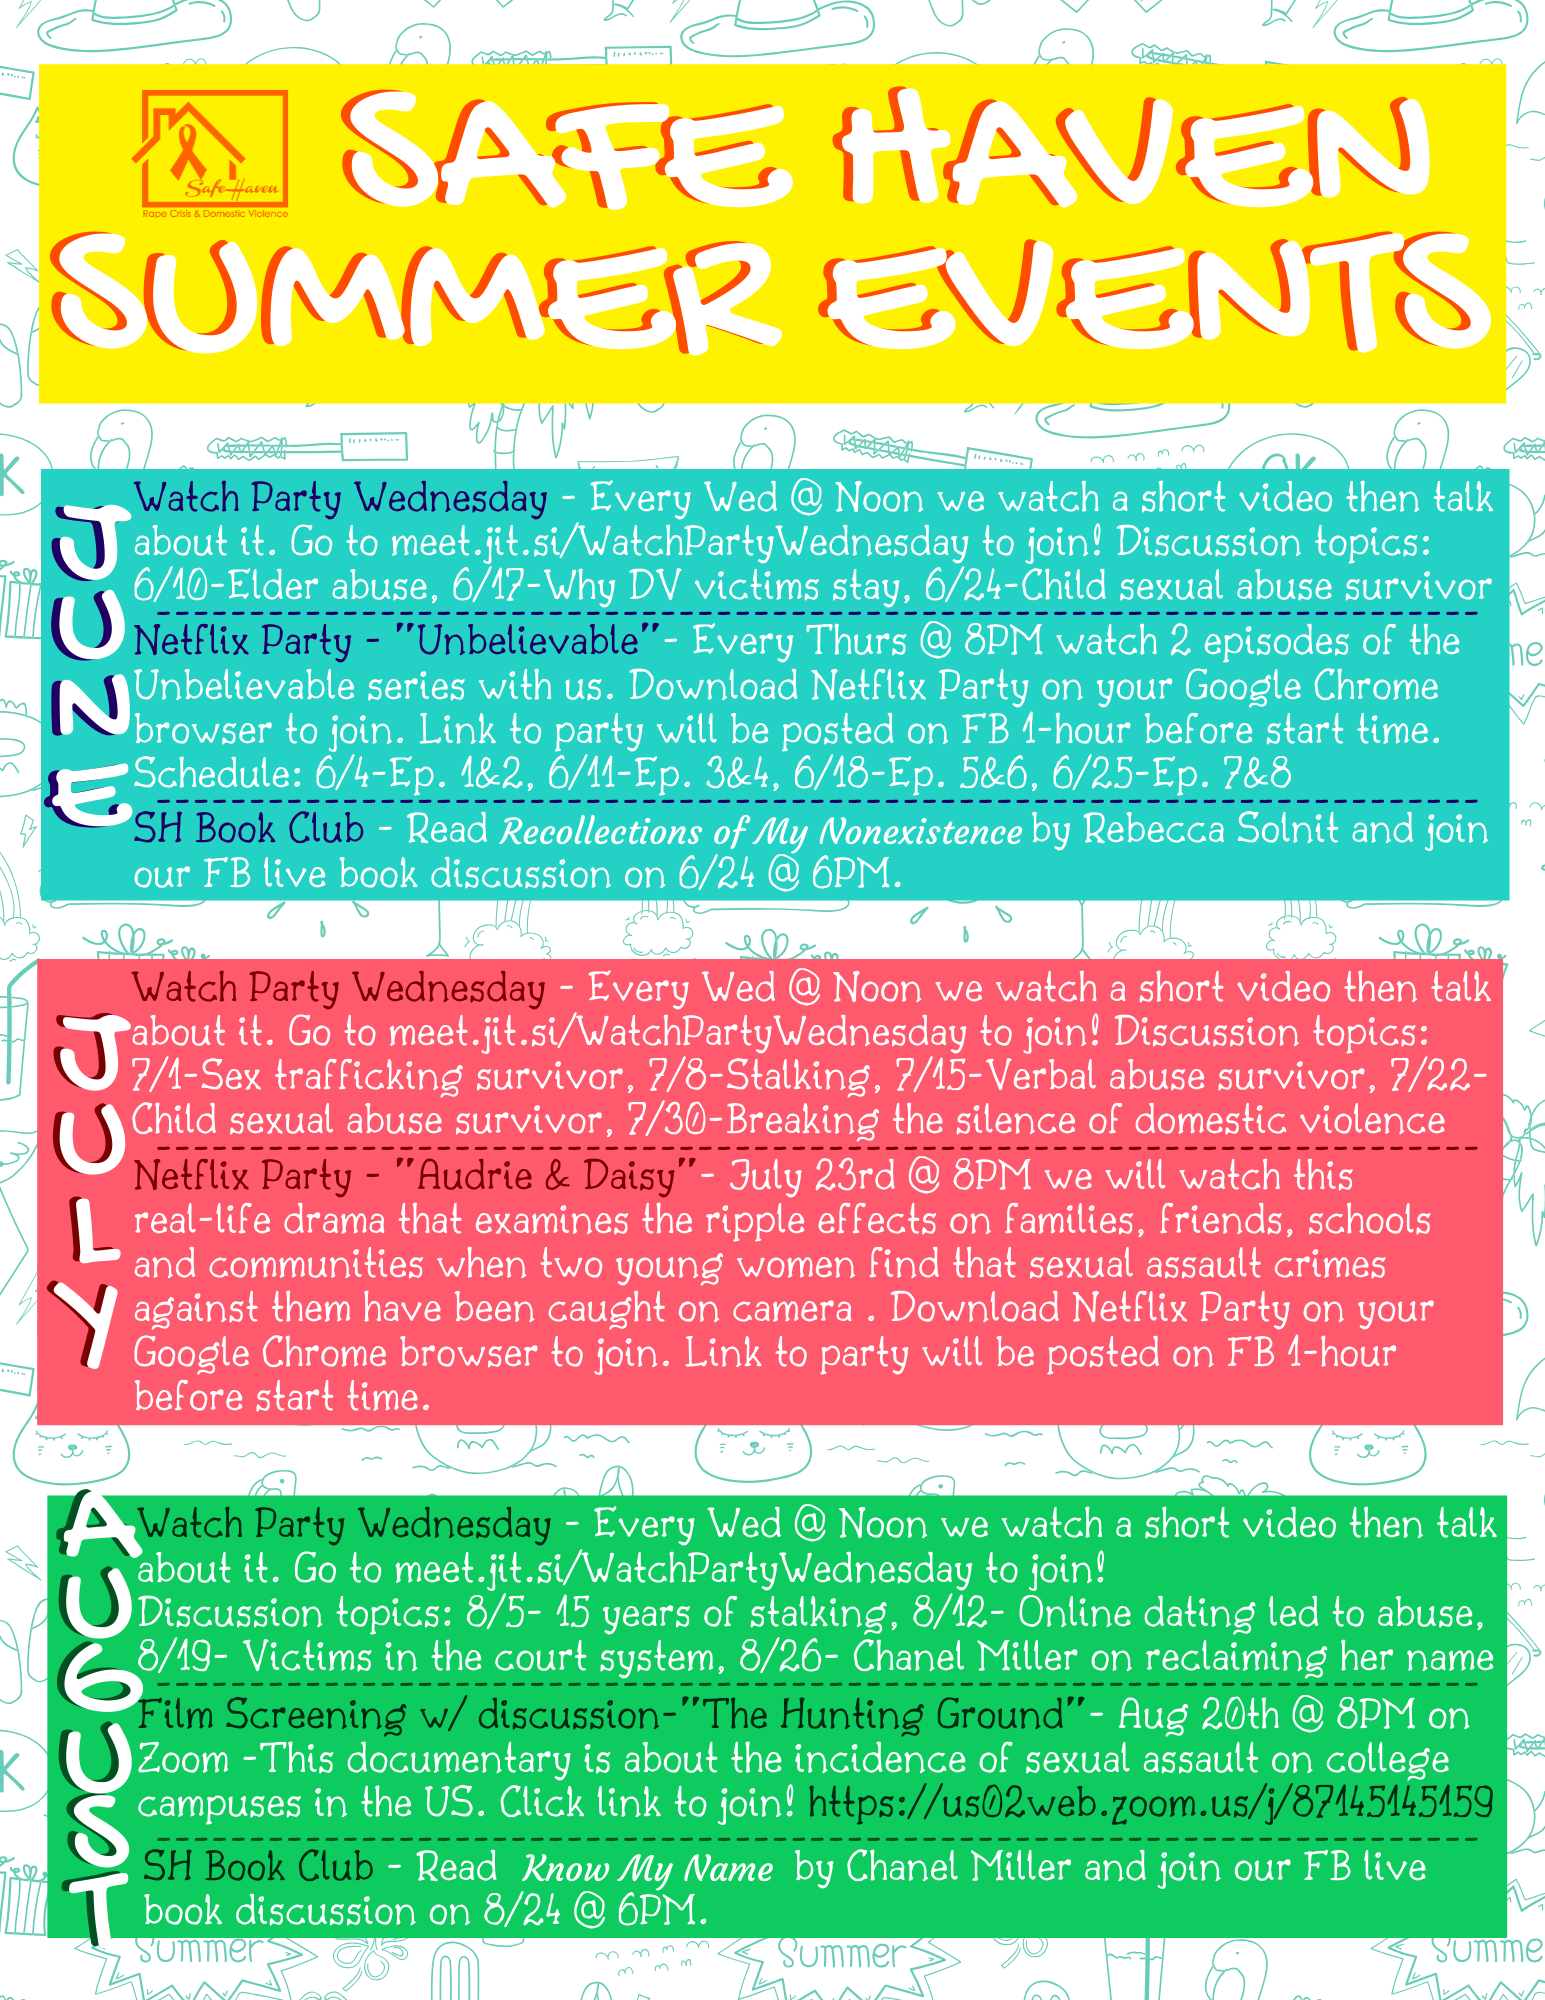 Summer Events 2020